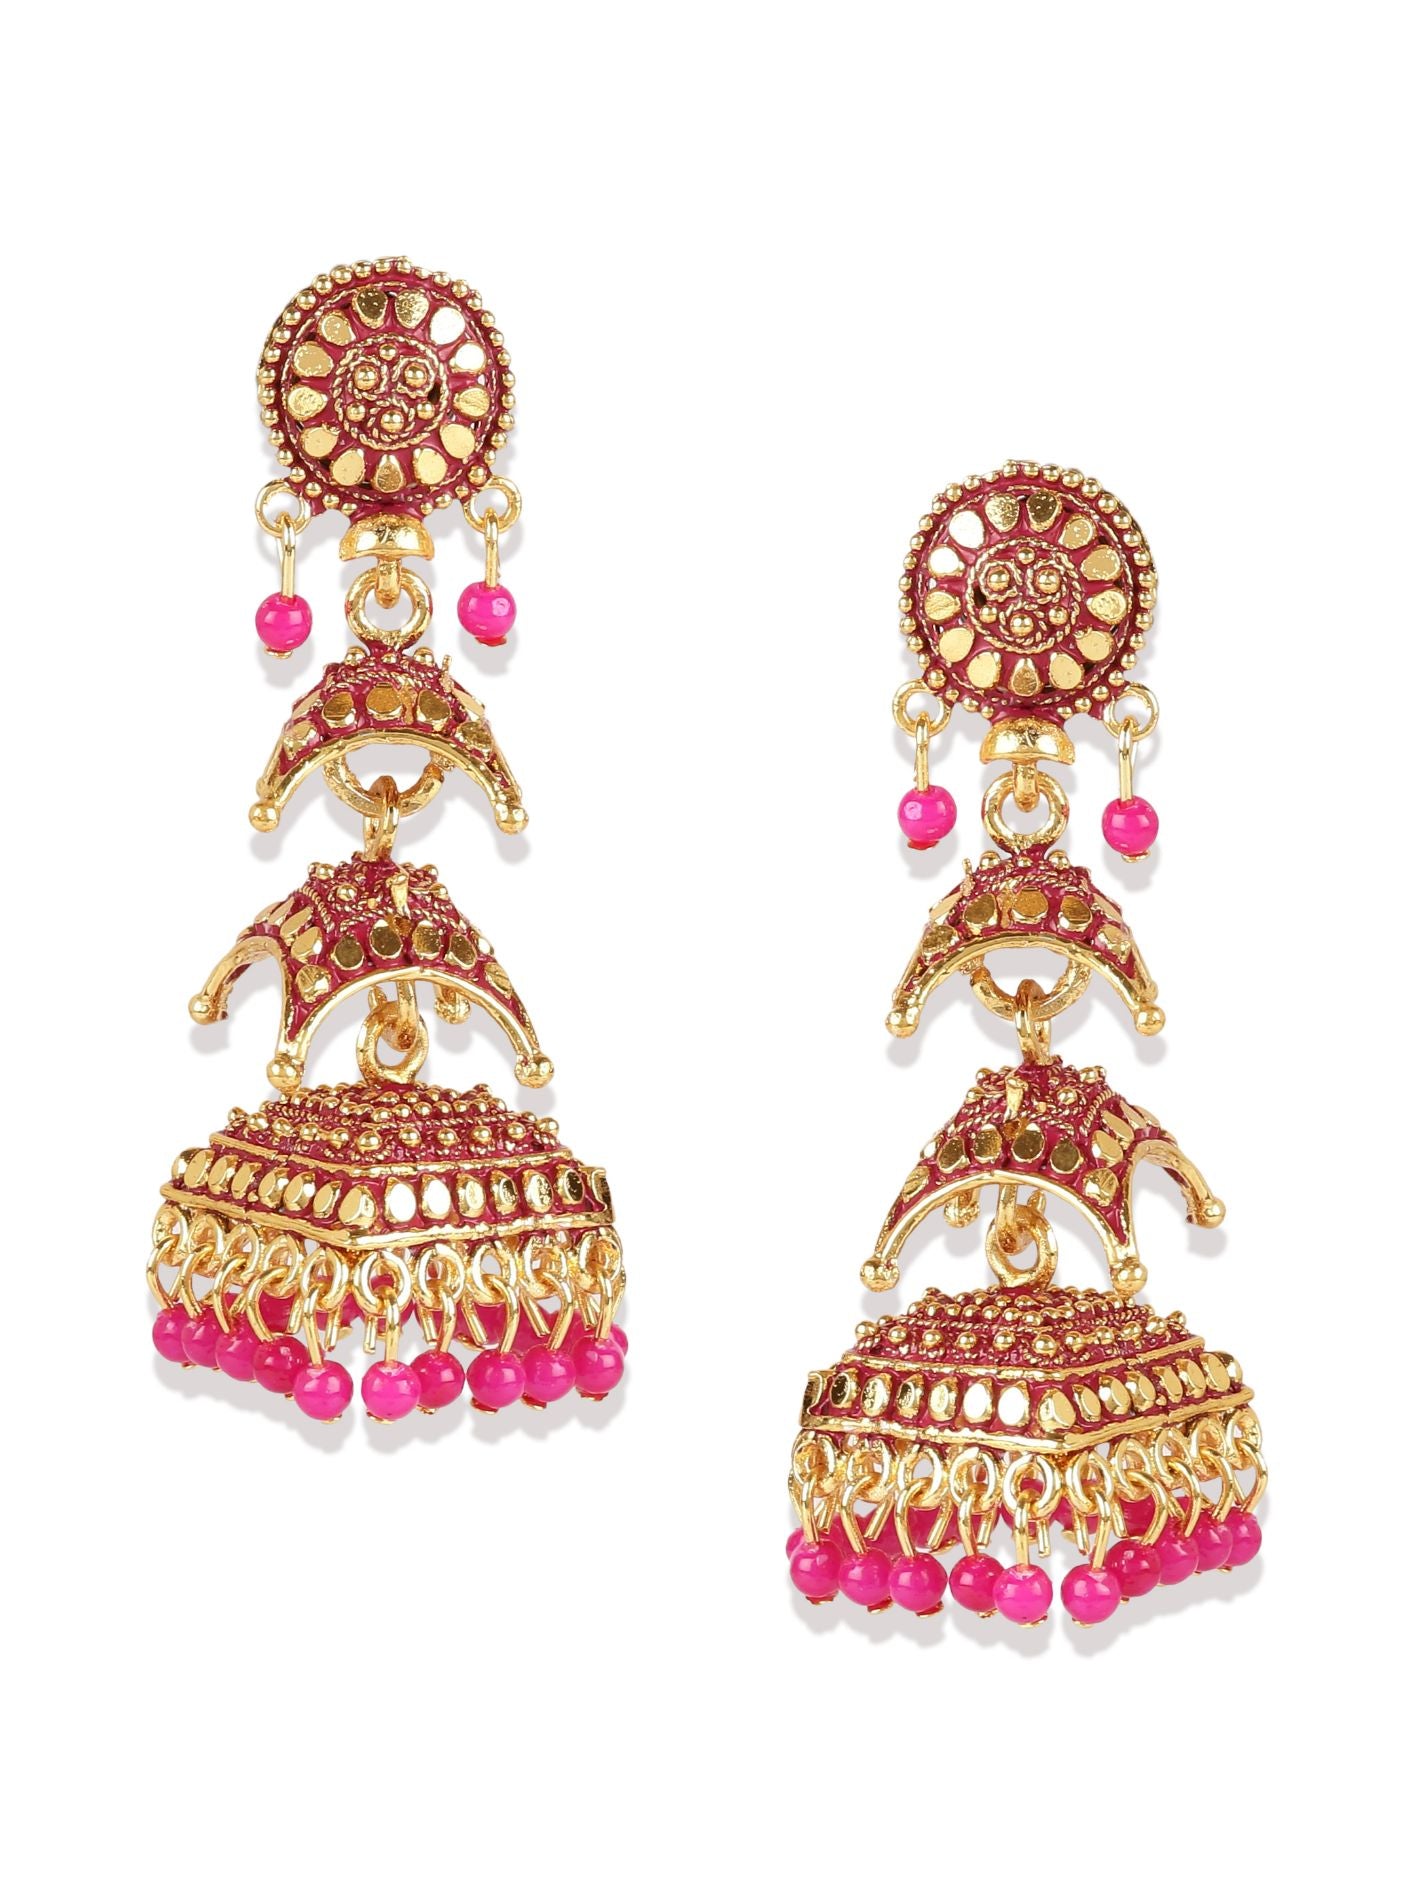 Women's Gold Plated & Pink Enamelled Dome Shaped Jhumkas - Anikas Creation